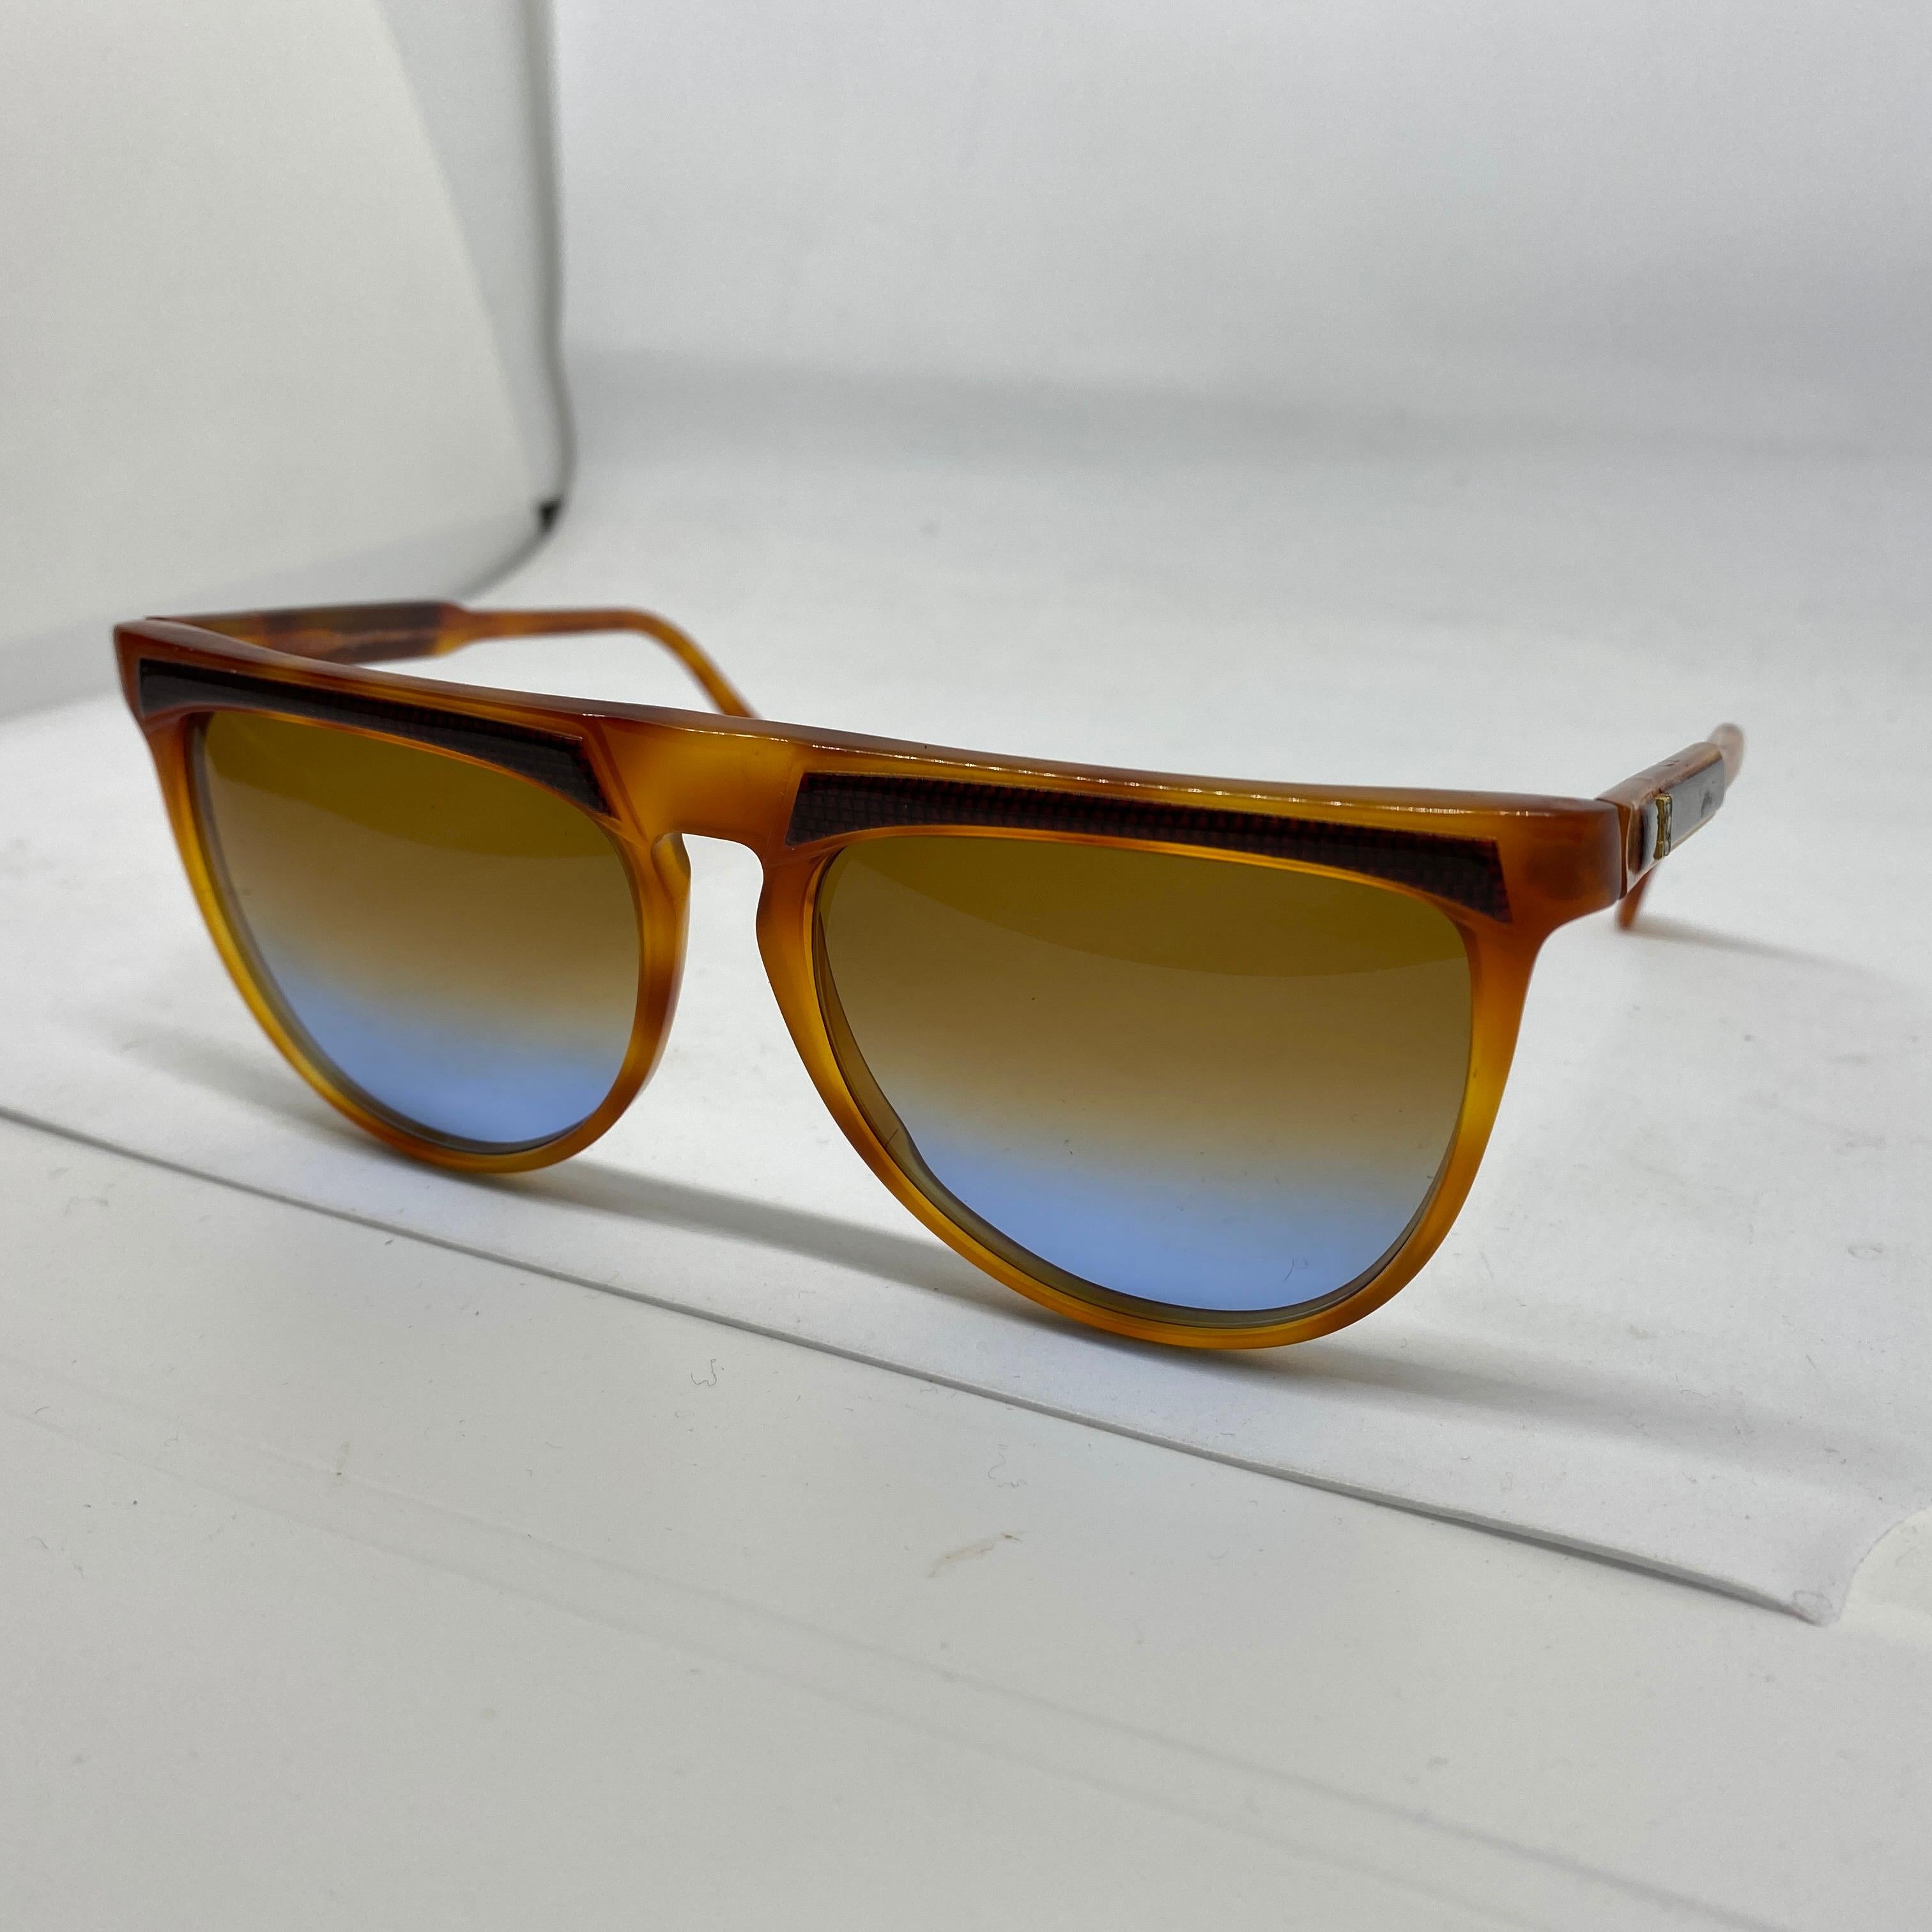 Never used italian vintage sunglasses designed by Laura Biagiotti in perfect conditions